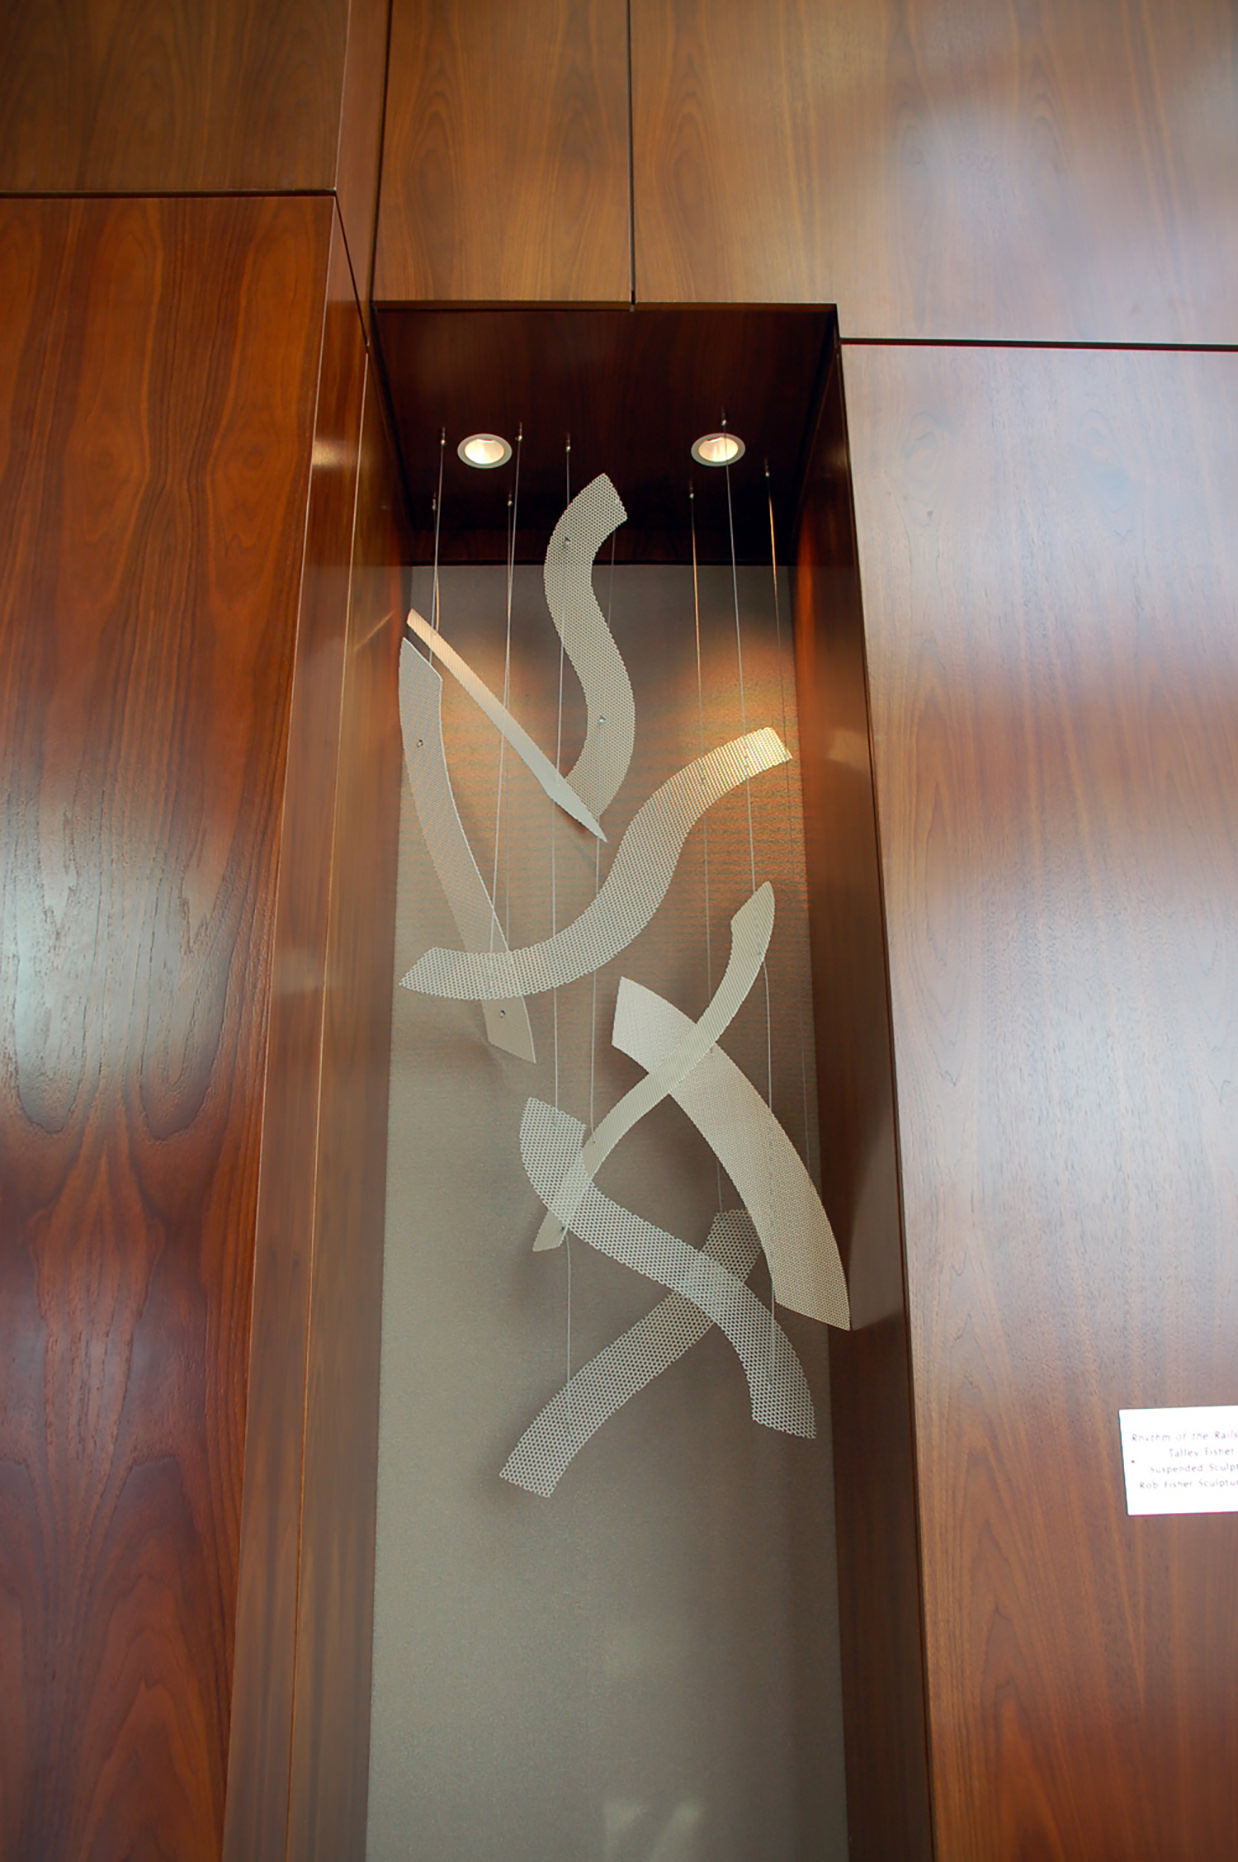 Small niche sculpture for Rhythm of the Rails by Talley Fisher, Residence Inn.